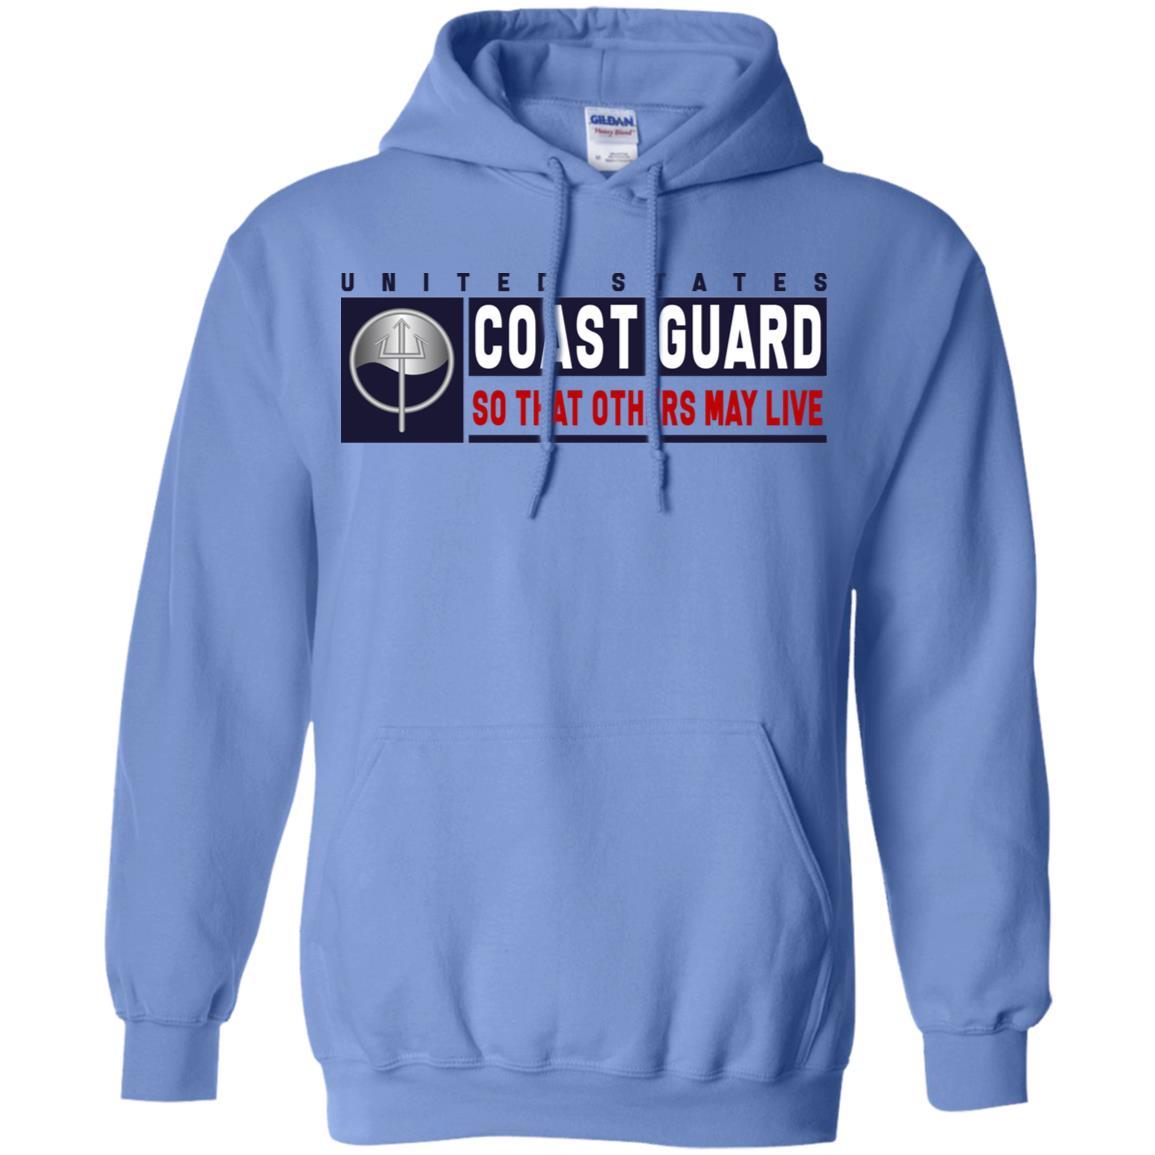 USCG MARINE SCIENCE TECHNICIAN MST Logo- So that others may live Long Sleeve - Pullover Hoodie-TShirt-USCG-Veterans Nation